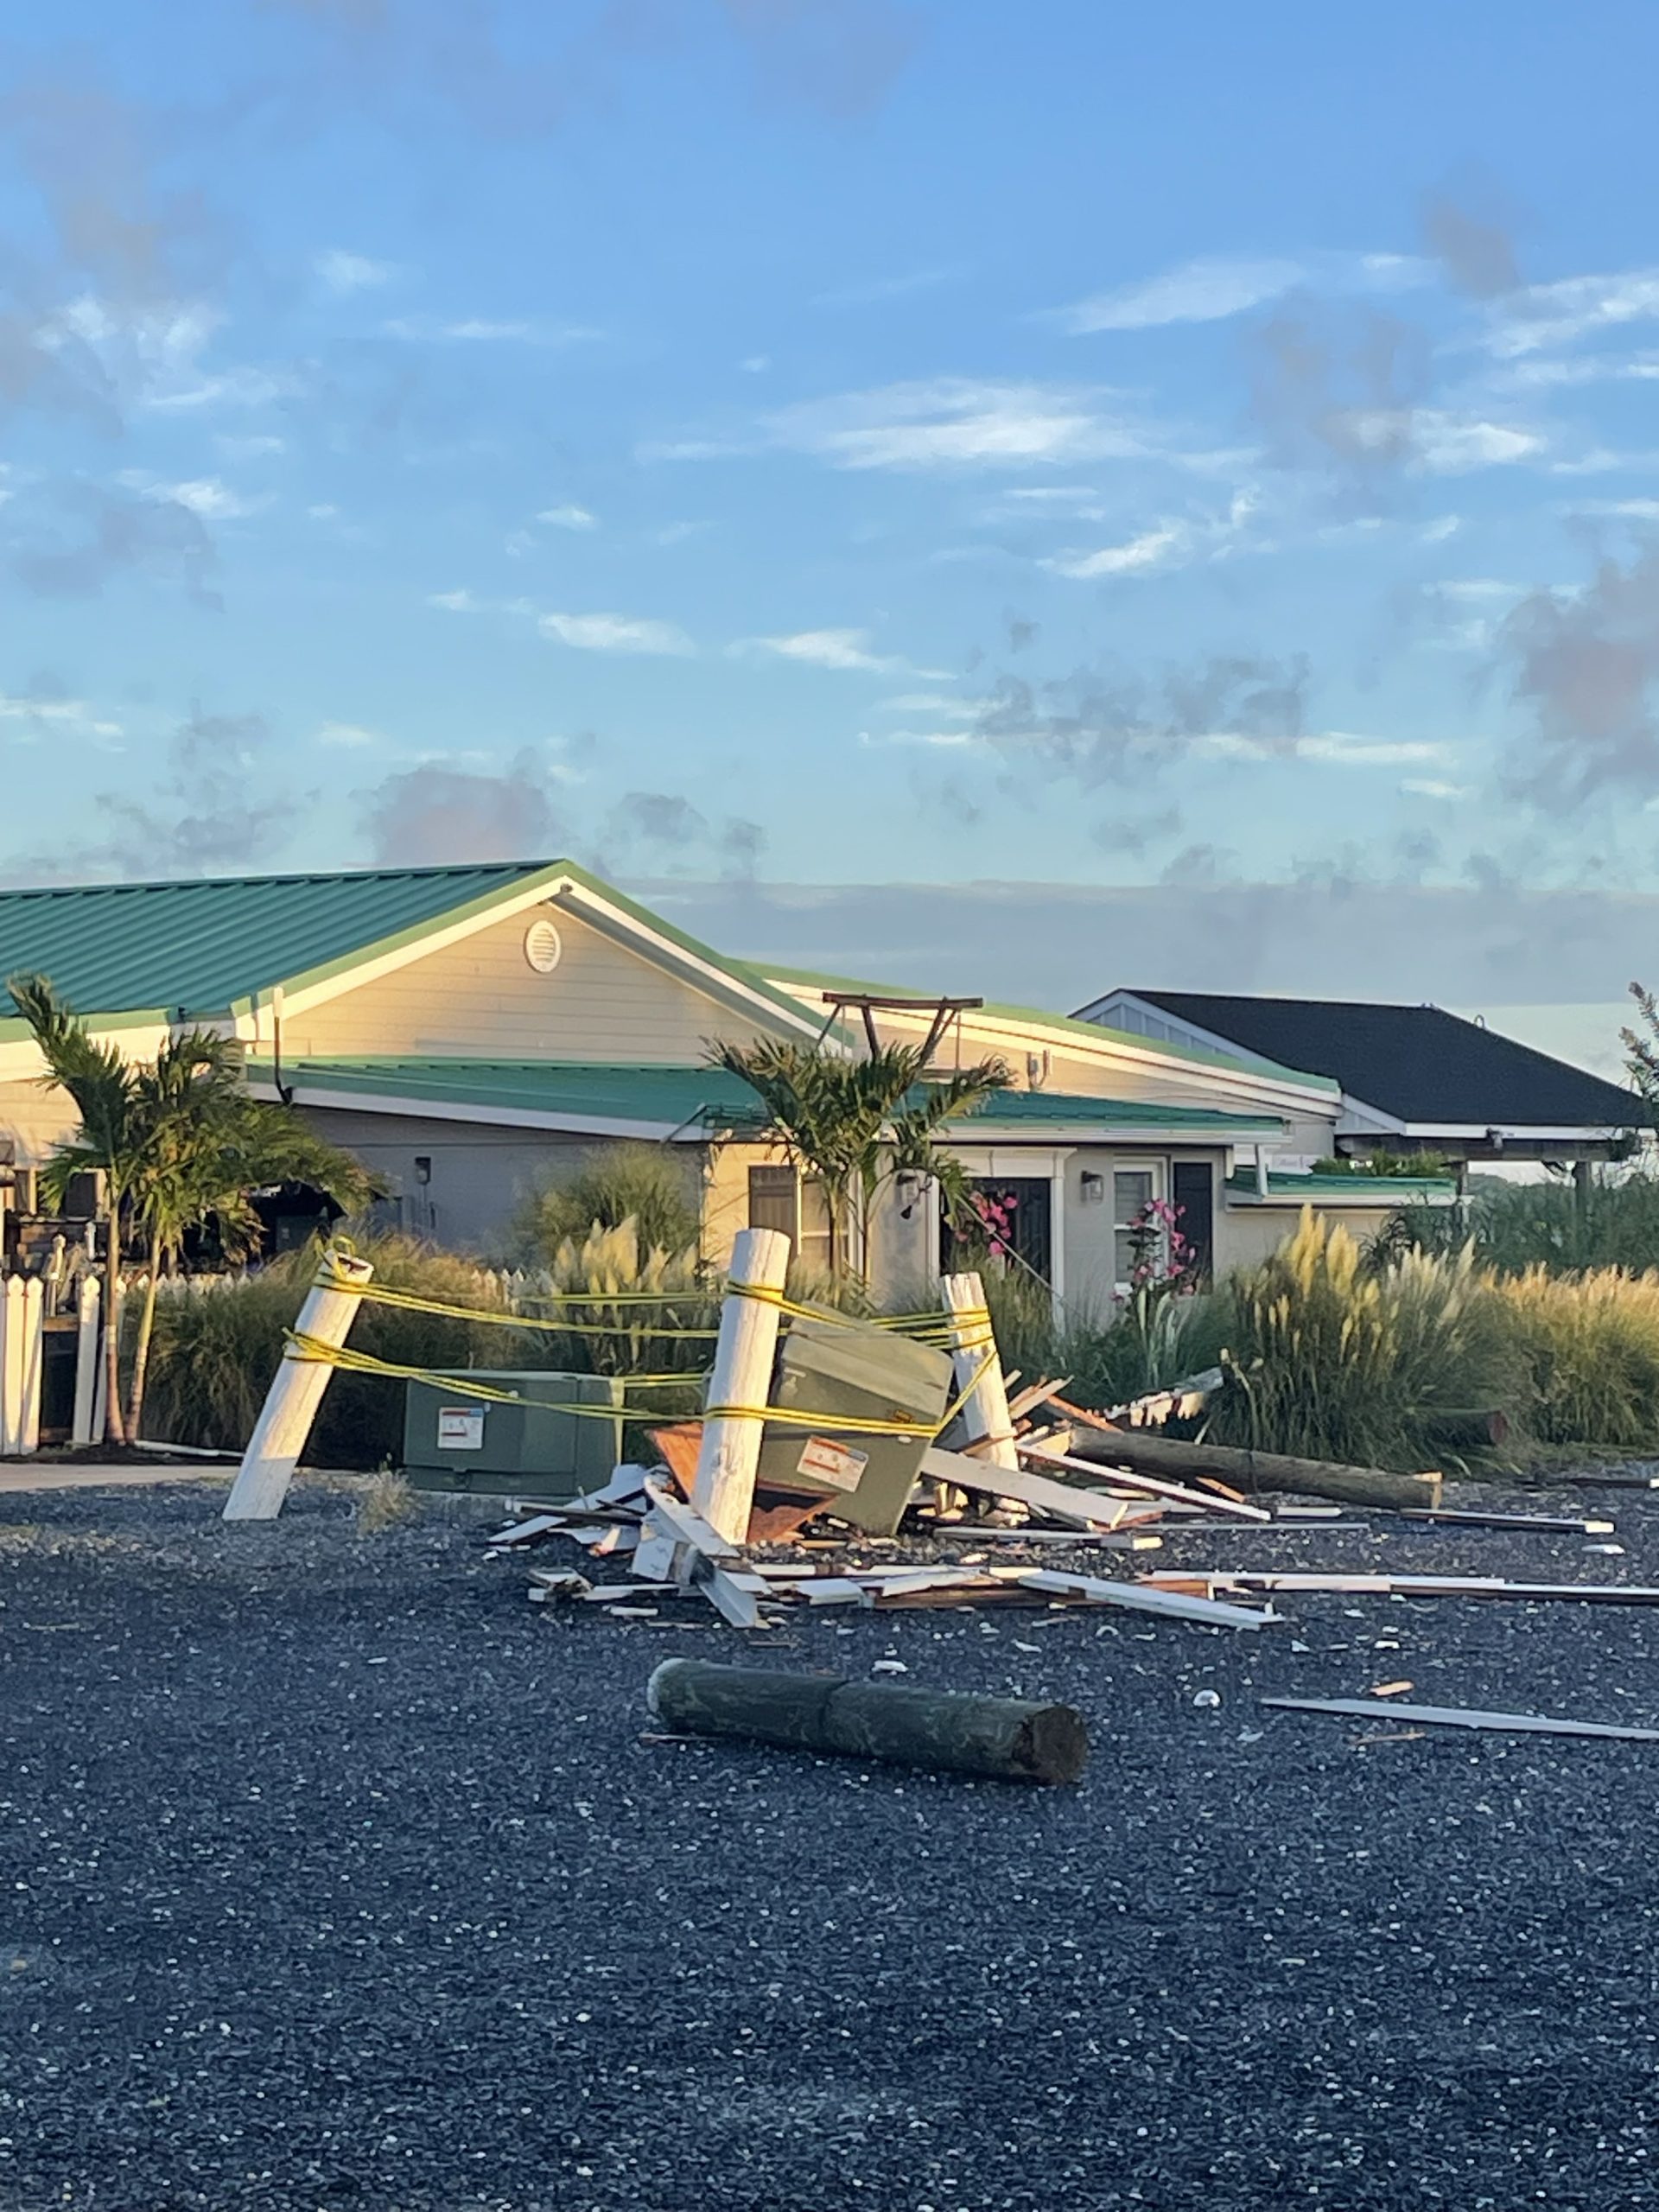 Sunset Bar and Grill in Oxford suffered major damage in Monday Night's Storm